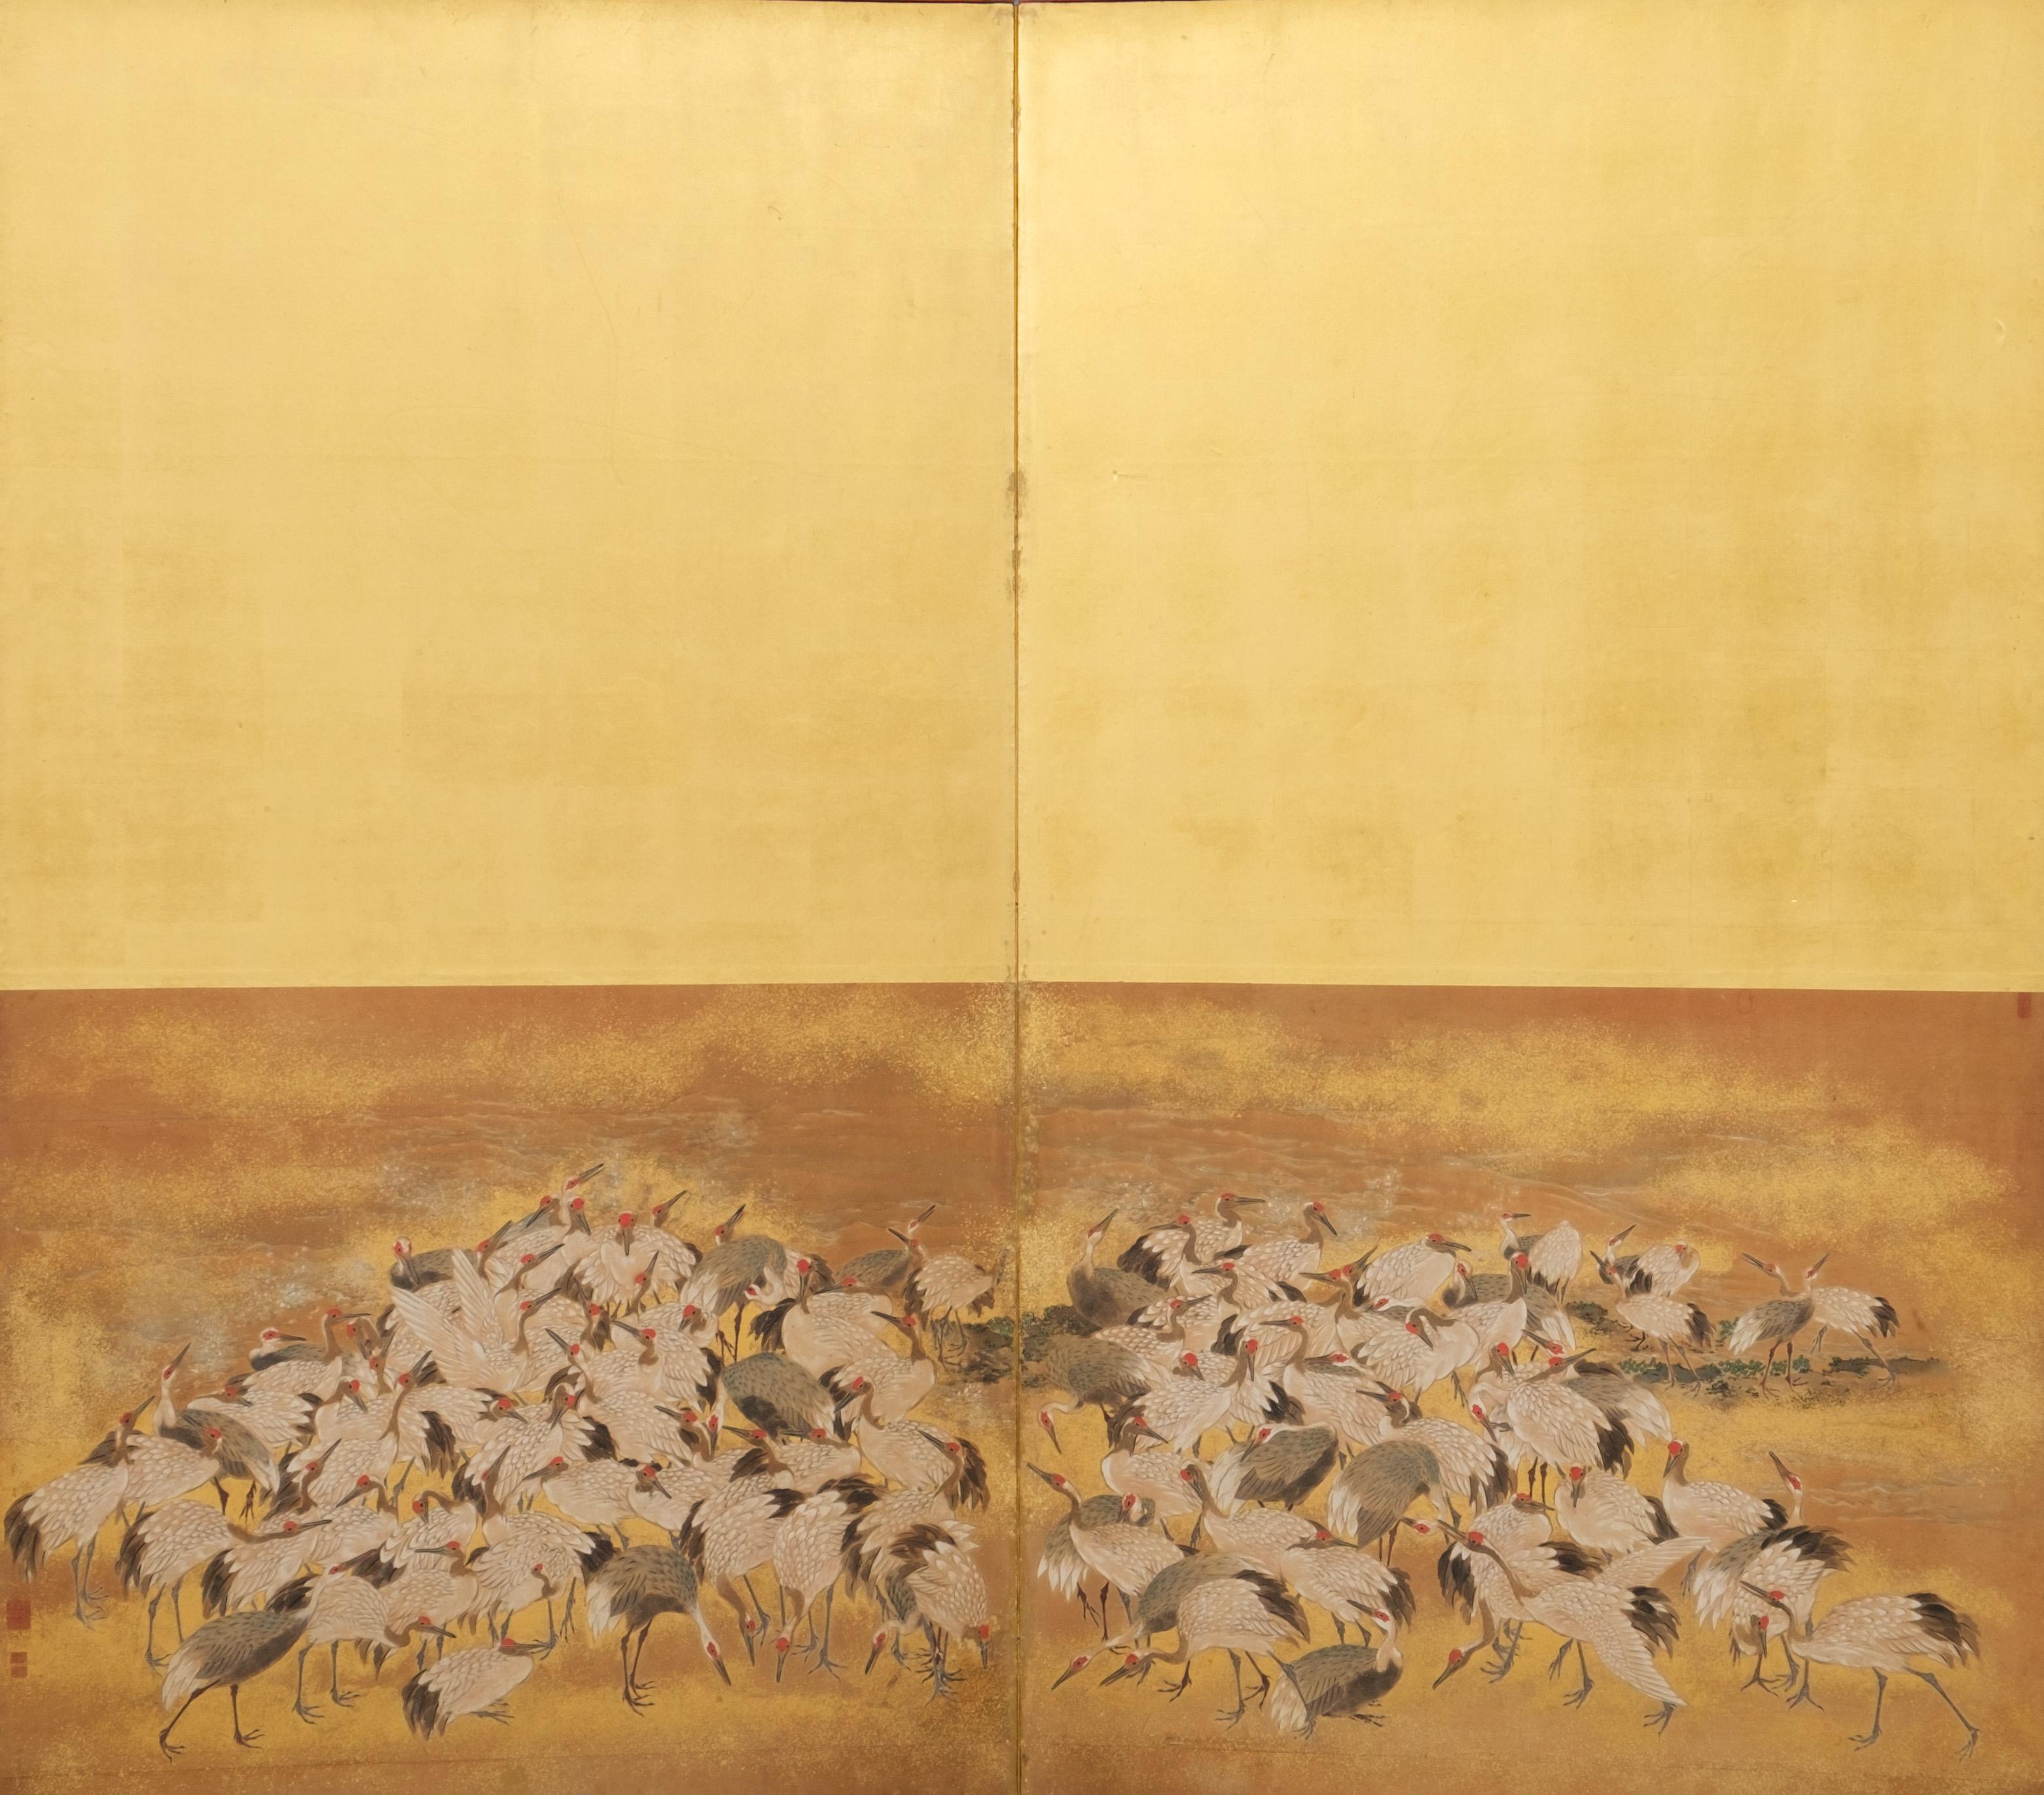 A gorgeous, tall two-panel byôbu (folding screen) with shiny gold leaf above a refined painting showcasing a very large sedge of cranes (tsuru) huddled up on an island and surrounded by a tumultuous sea landscape.

In Japan, 